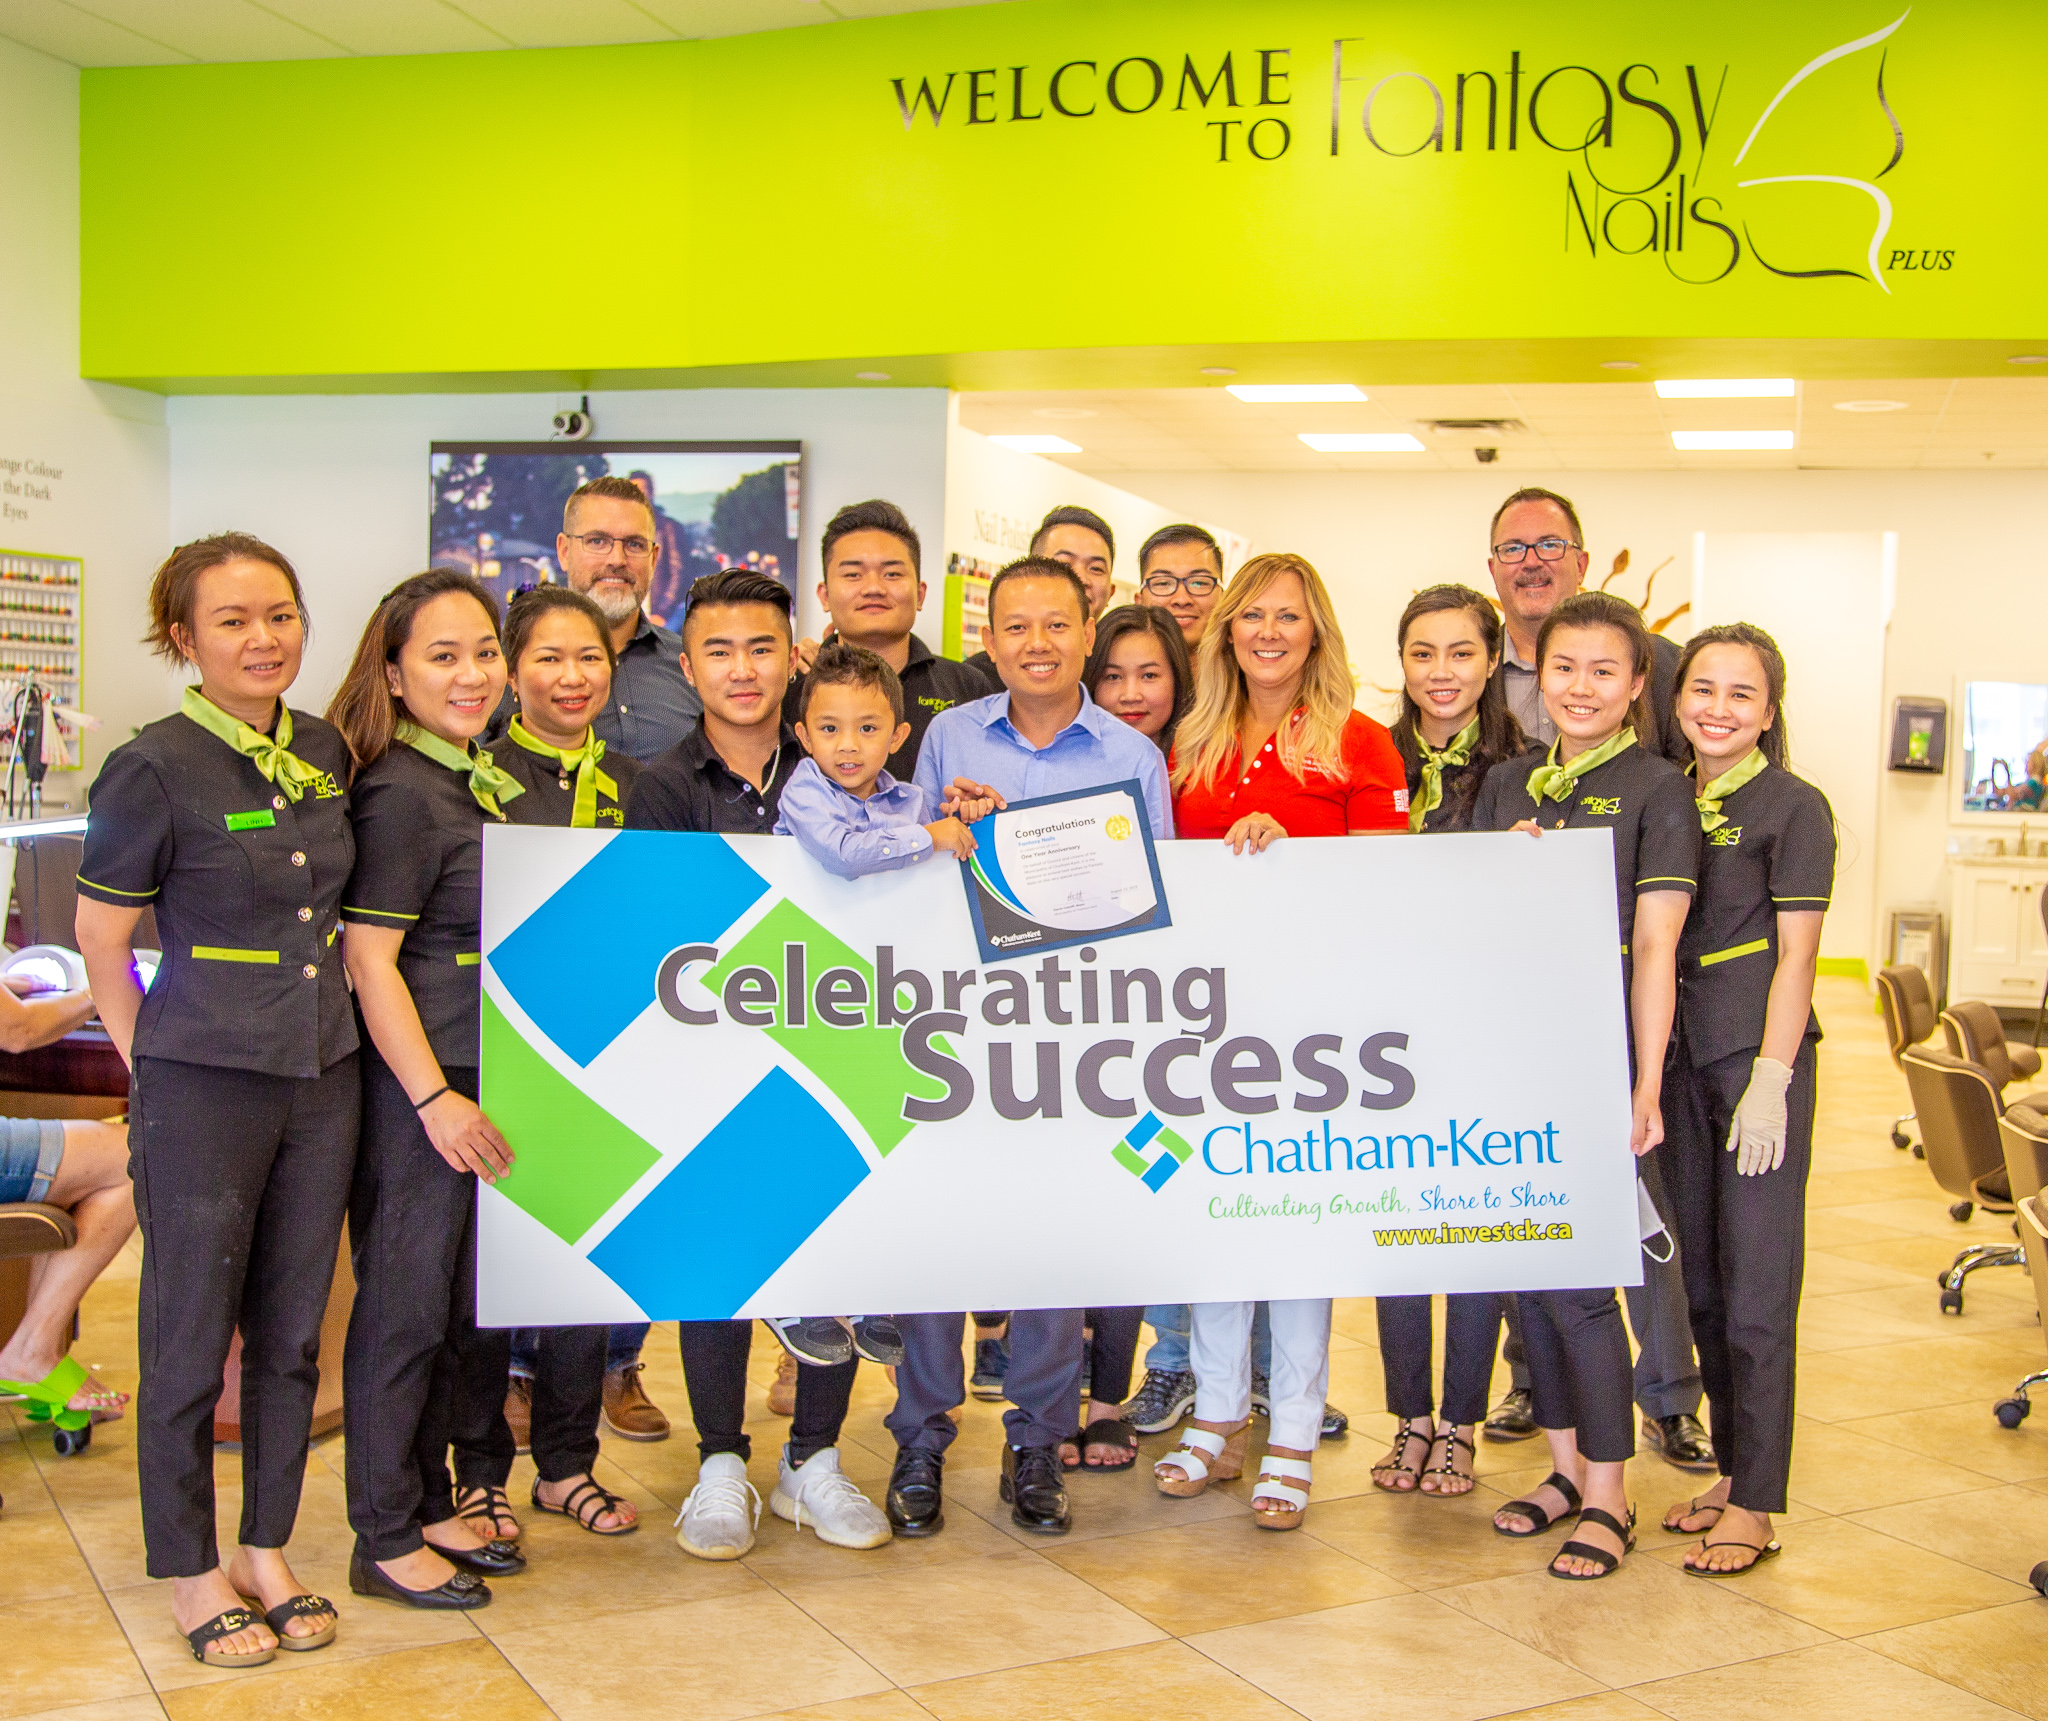 Minh Dinh (centre), President of Fantasy Nails Plus, along with family, staff, the Chatham-Kent Economic Development team, and M